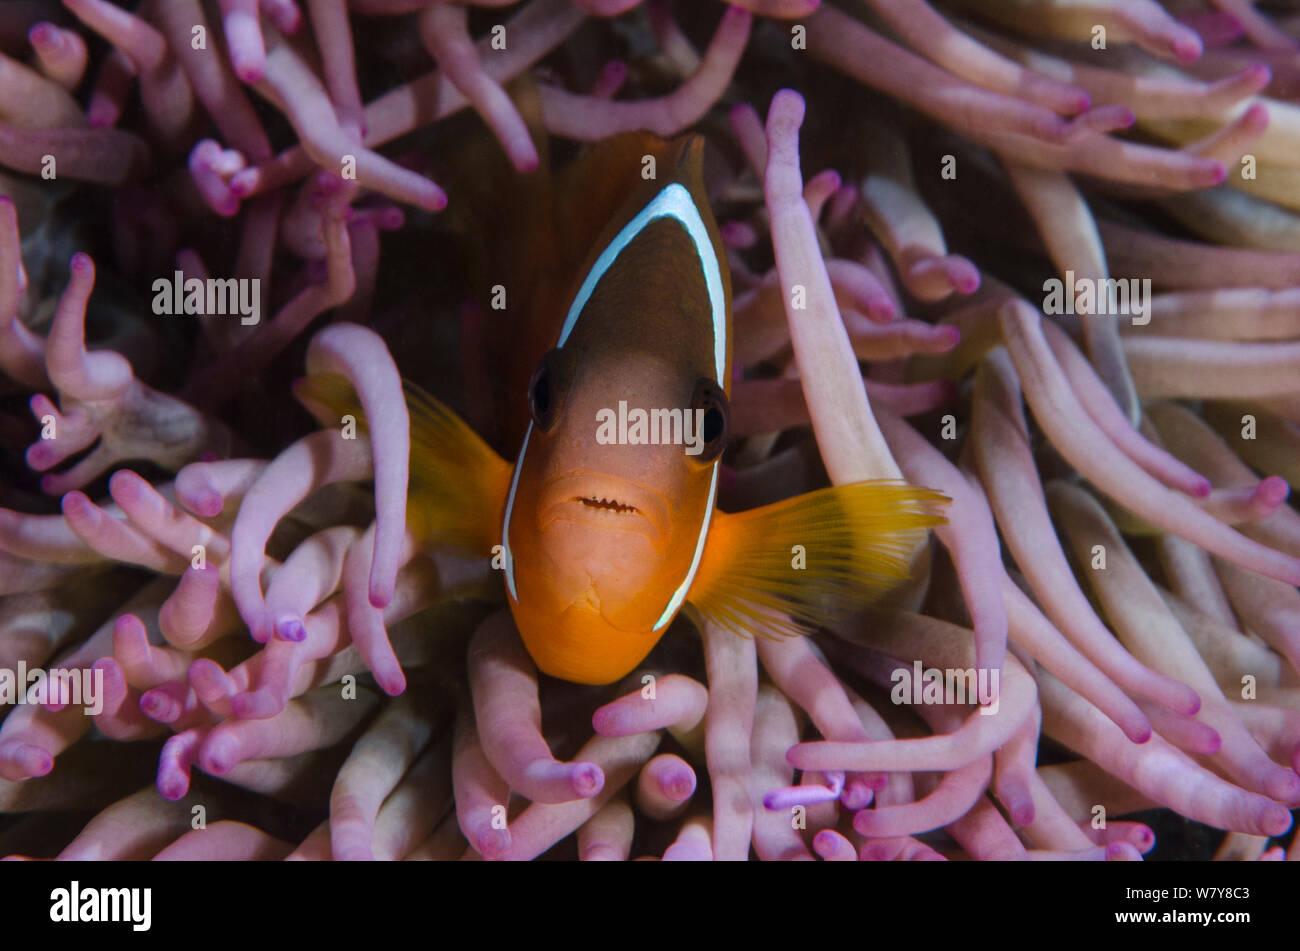 Fiji anemonefish (Amphiprion barberi) sheltering in host anemone for protection. Fiji, South Pacific. Stock Photo